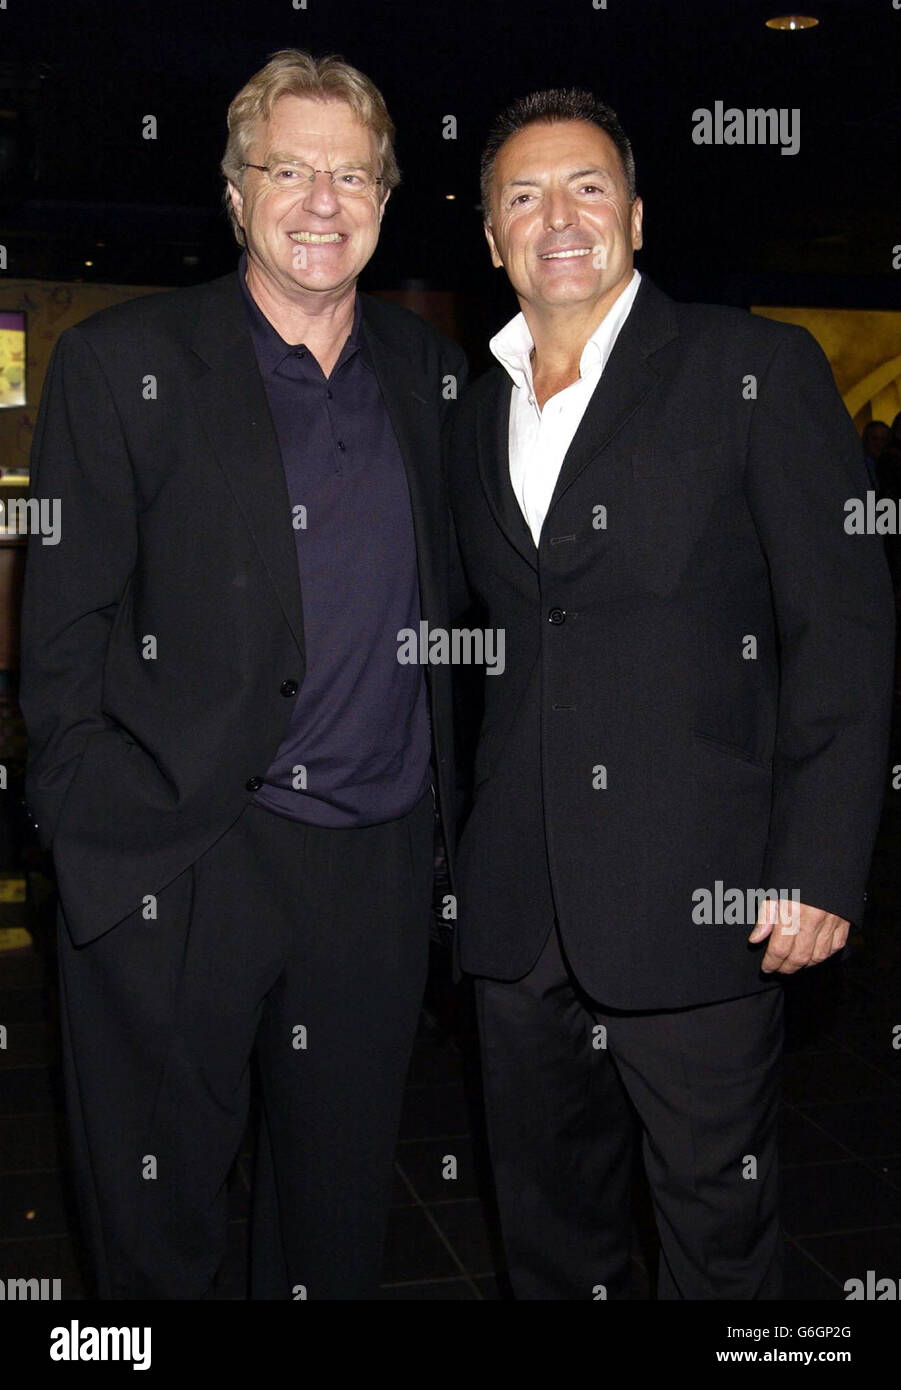 Stars of the film Jerry Springer (left) and Armand Assante arriving for the UK premiere of 'Citizen Verdict', at the Warner Village cinema in Leicester Square, London. Stock Photo